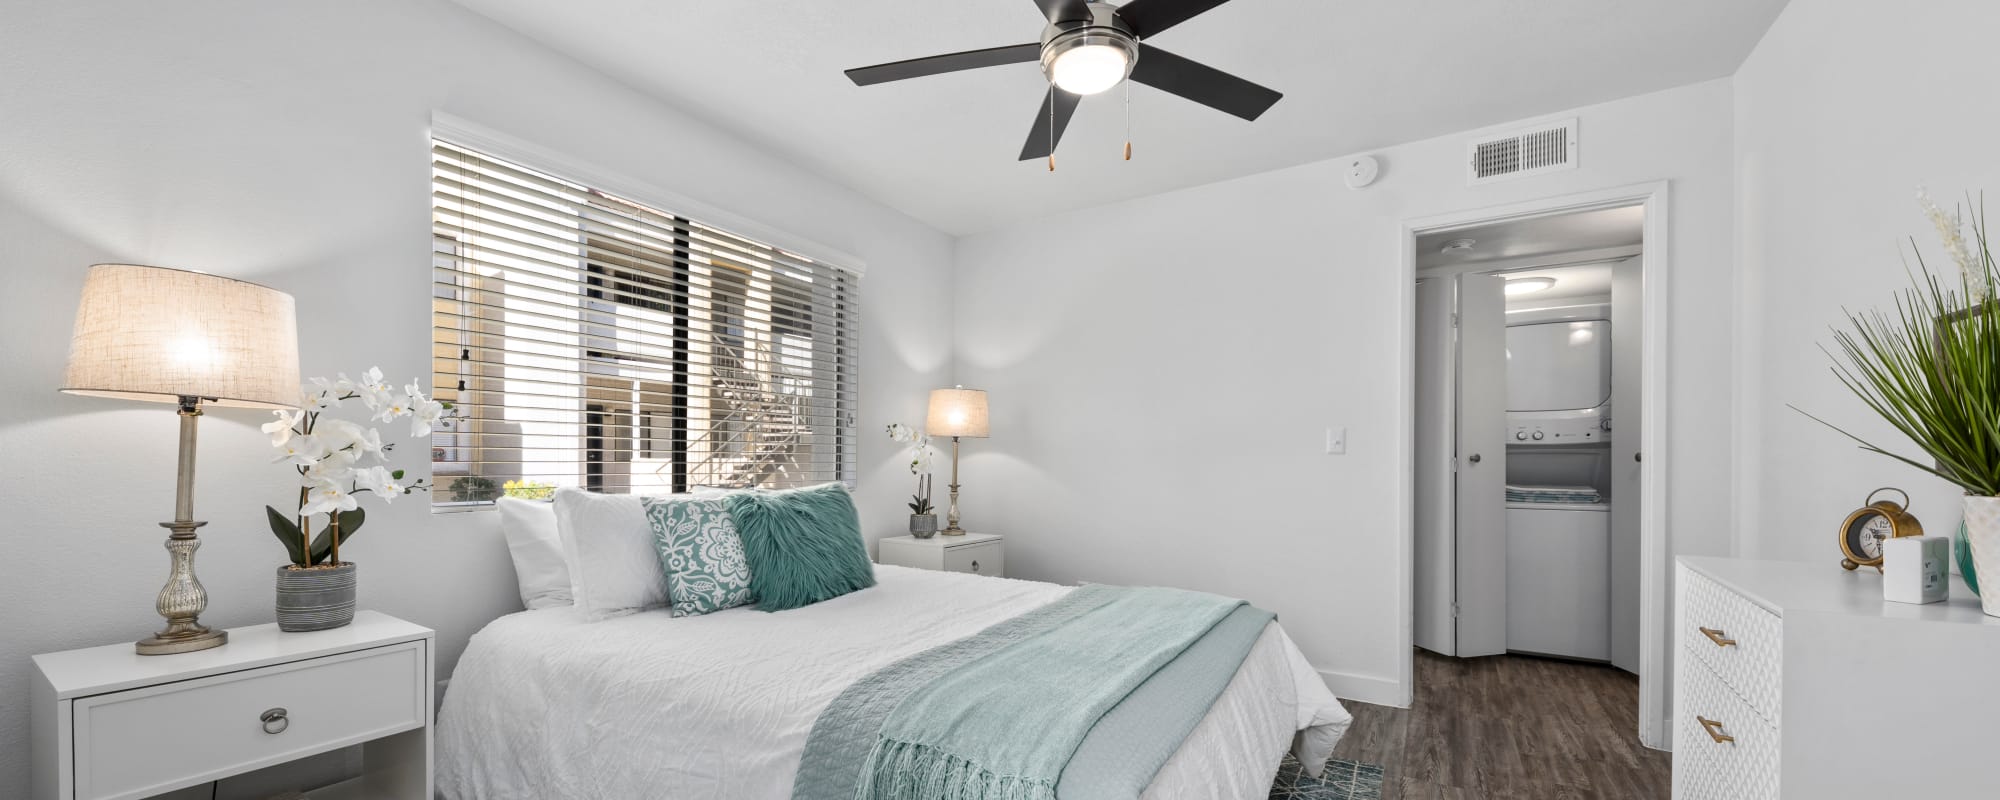 Bedroom with ceiling fan at Park at 33rd in Phoenix, Arizona